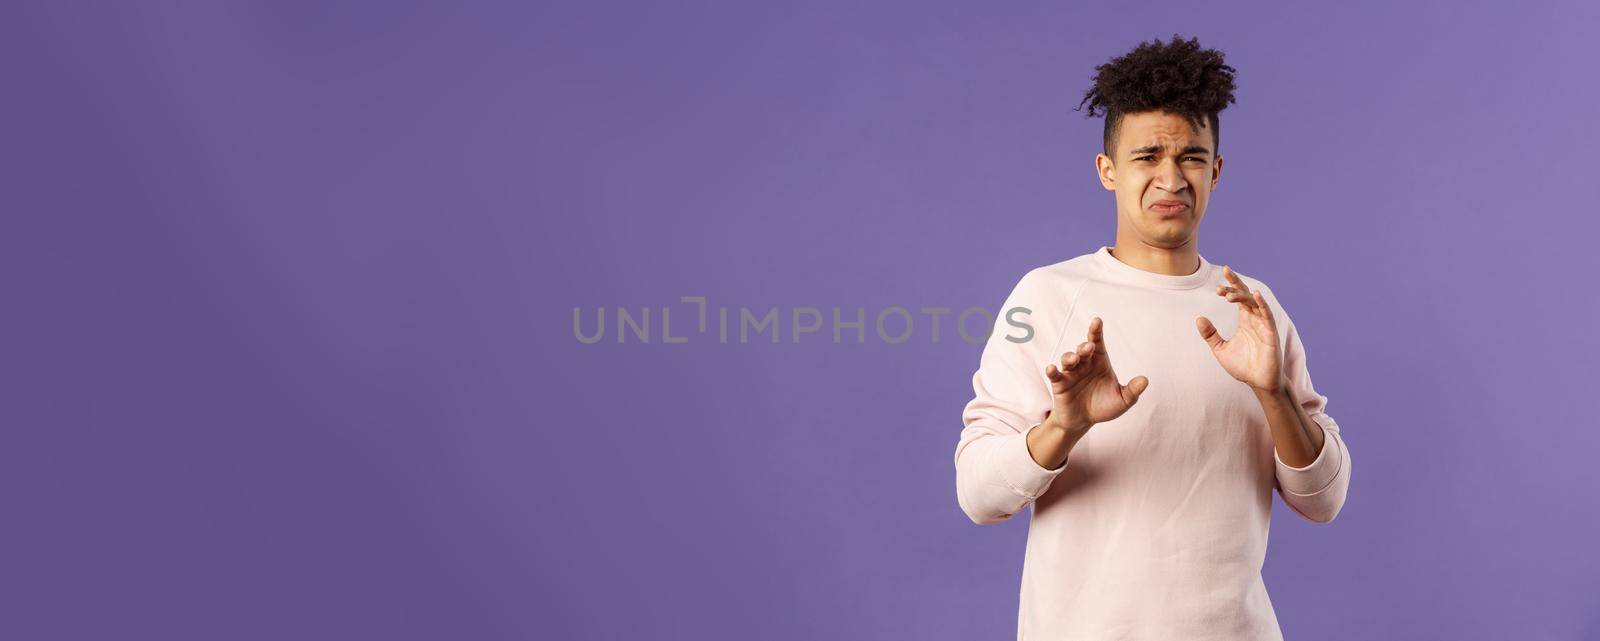 Phew get it away from me. Portrait of disgusted young man smelling something awful, step away and blocking it with raised arms, refuse grimacing with aversion and reluctance, purple background by Benzoix